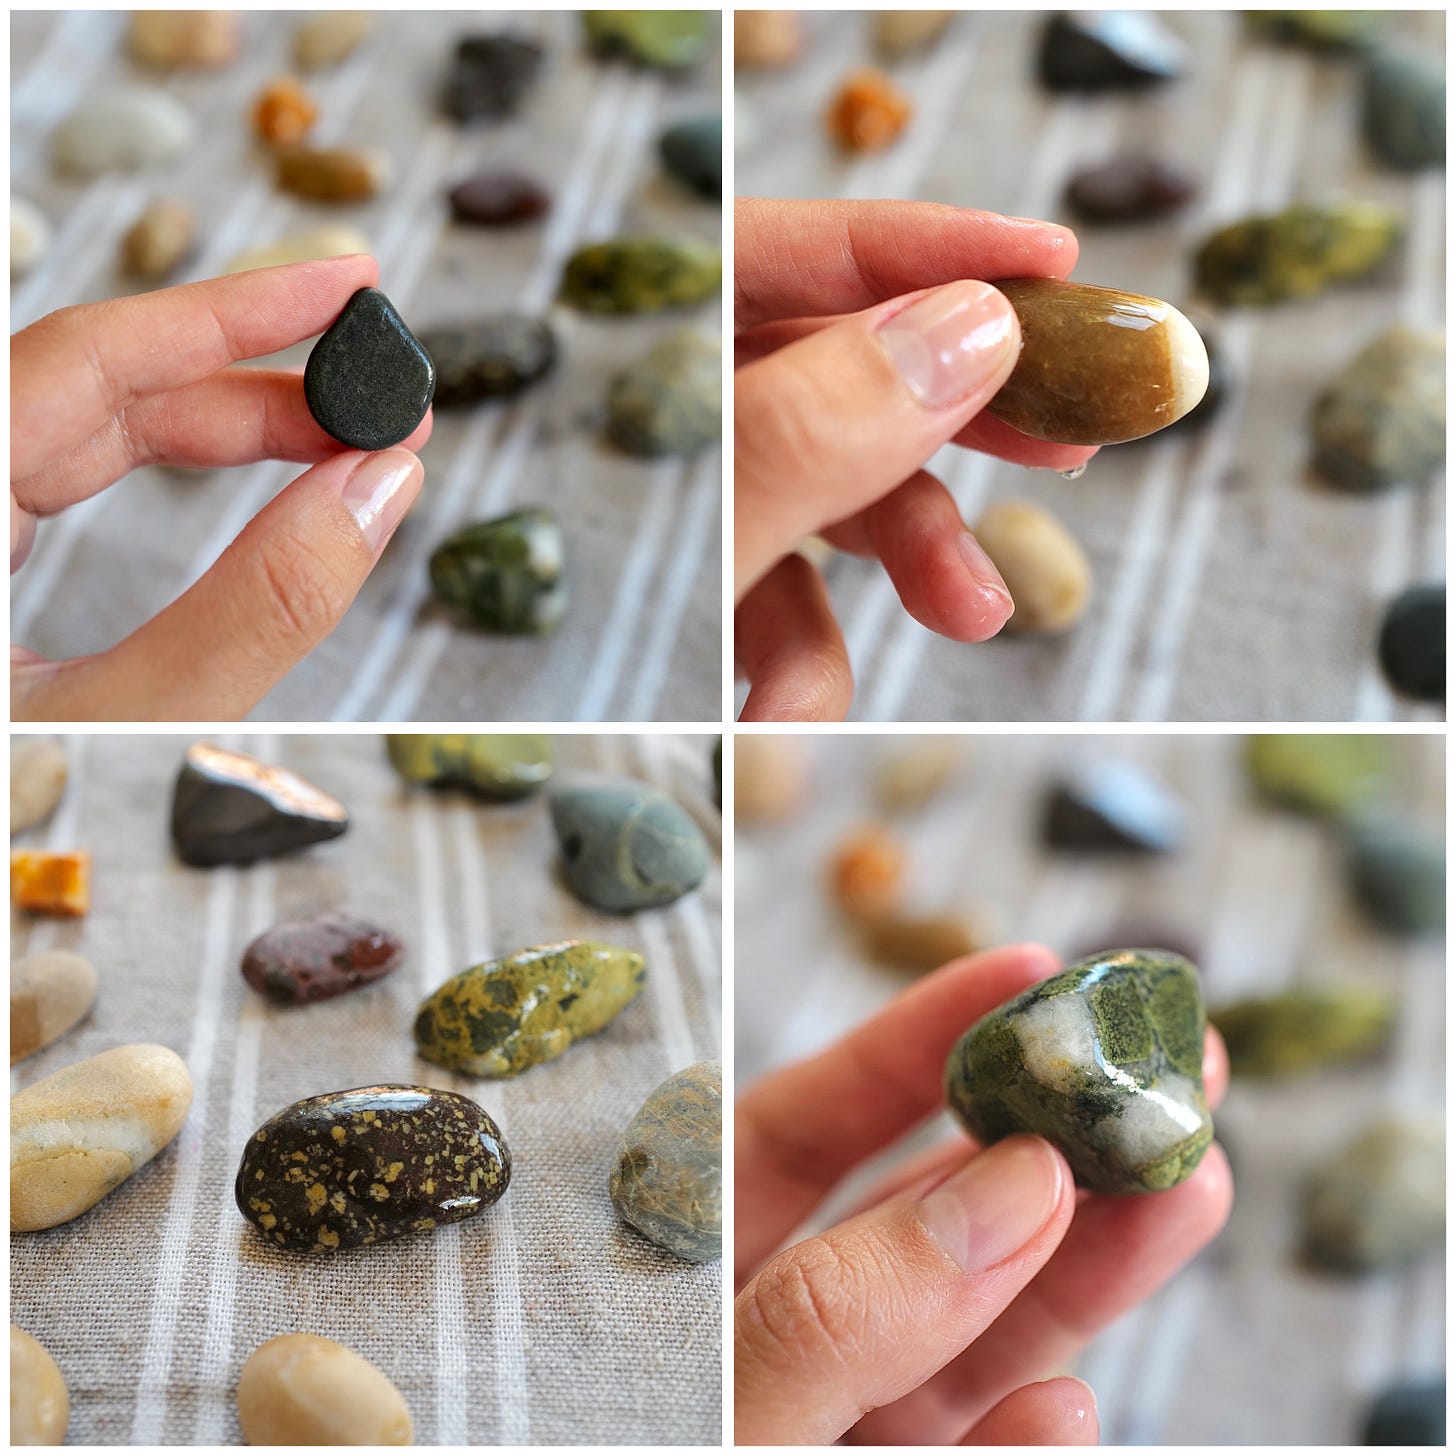 Colorful pebbles being held in close-up photos